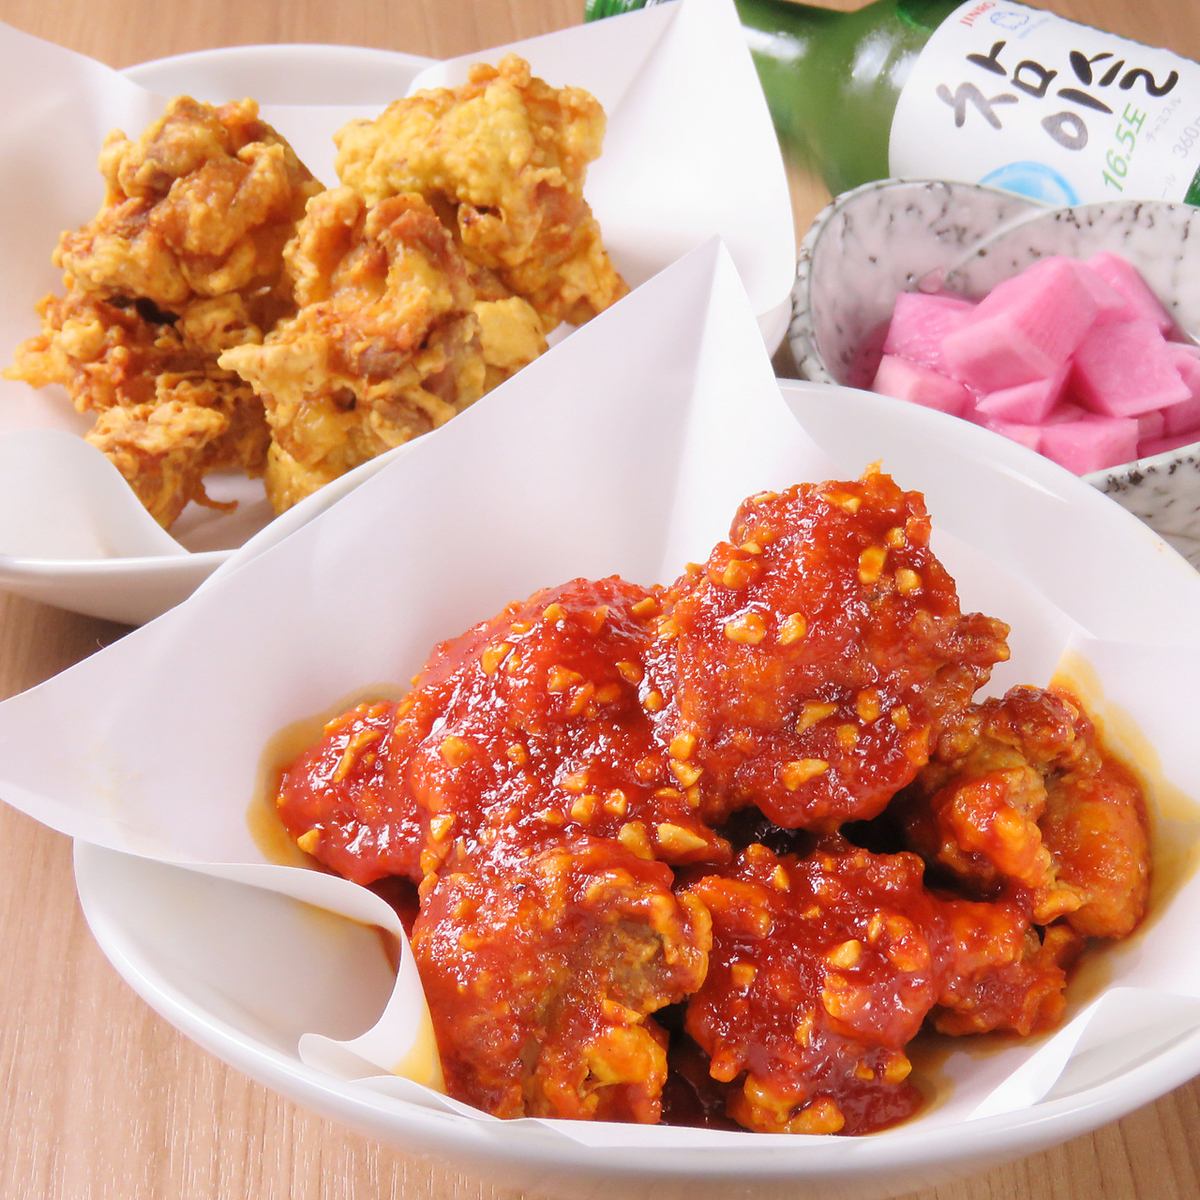 We offer authentic Korean cuisine! You can enjoy authentic spiciness♪